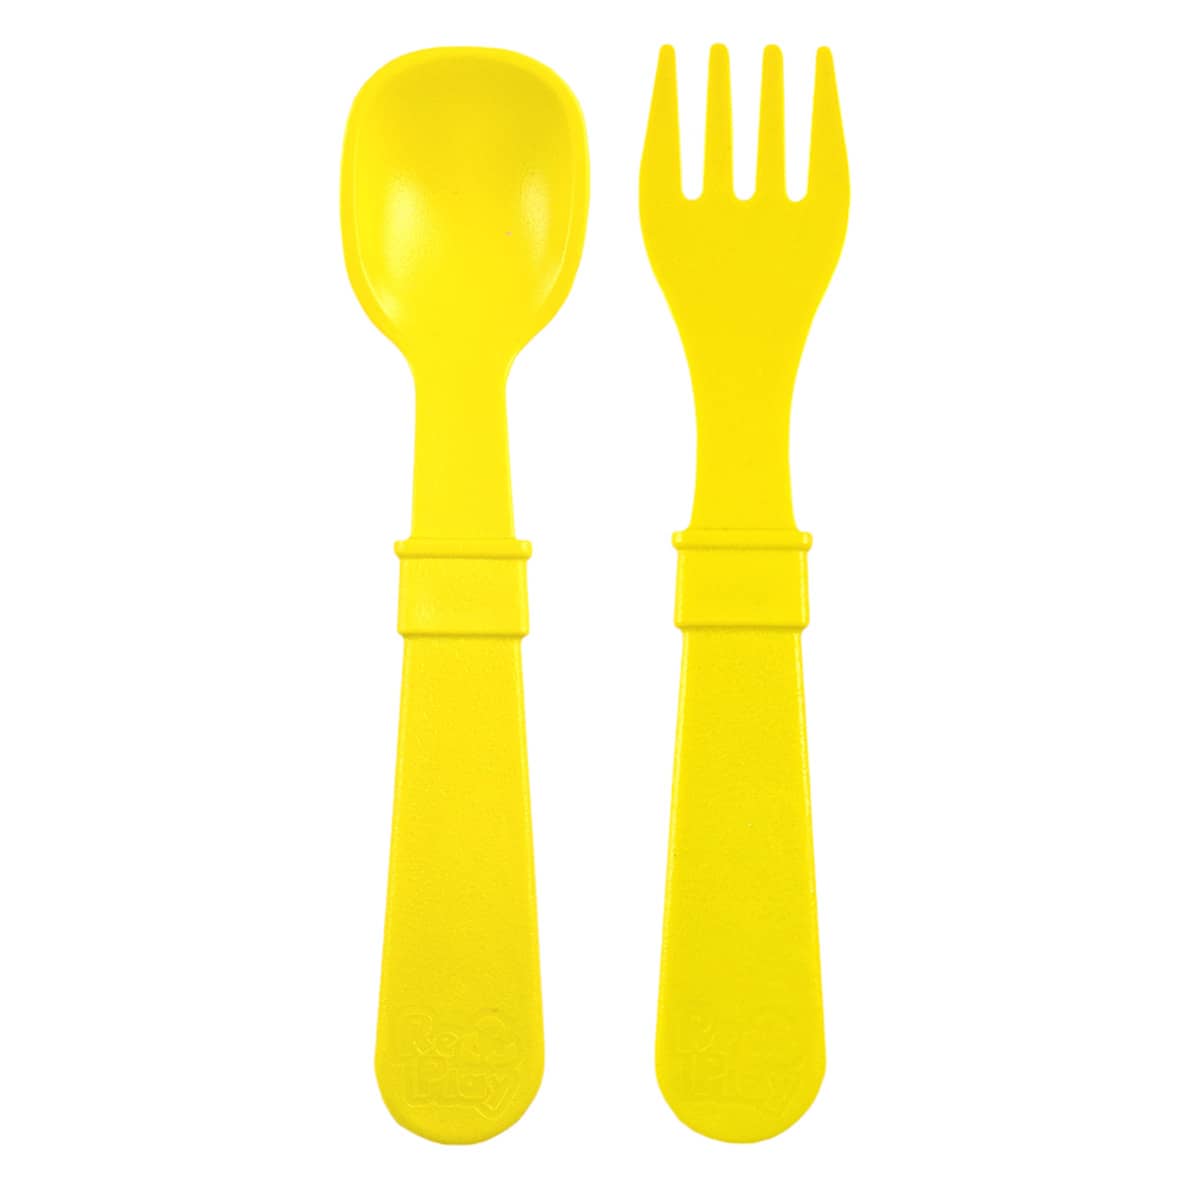 Re-Play Recycled Fork and Spoon Set - Yellow